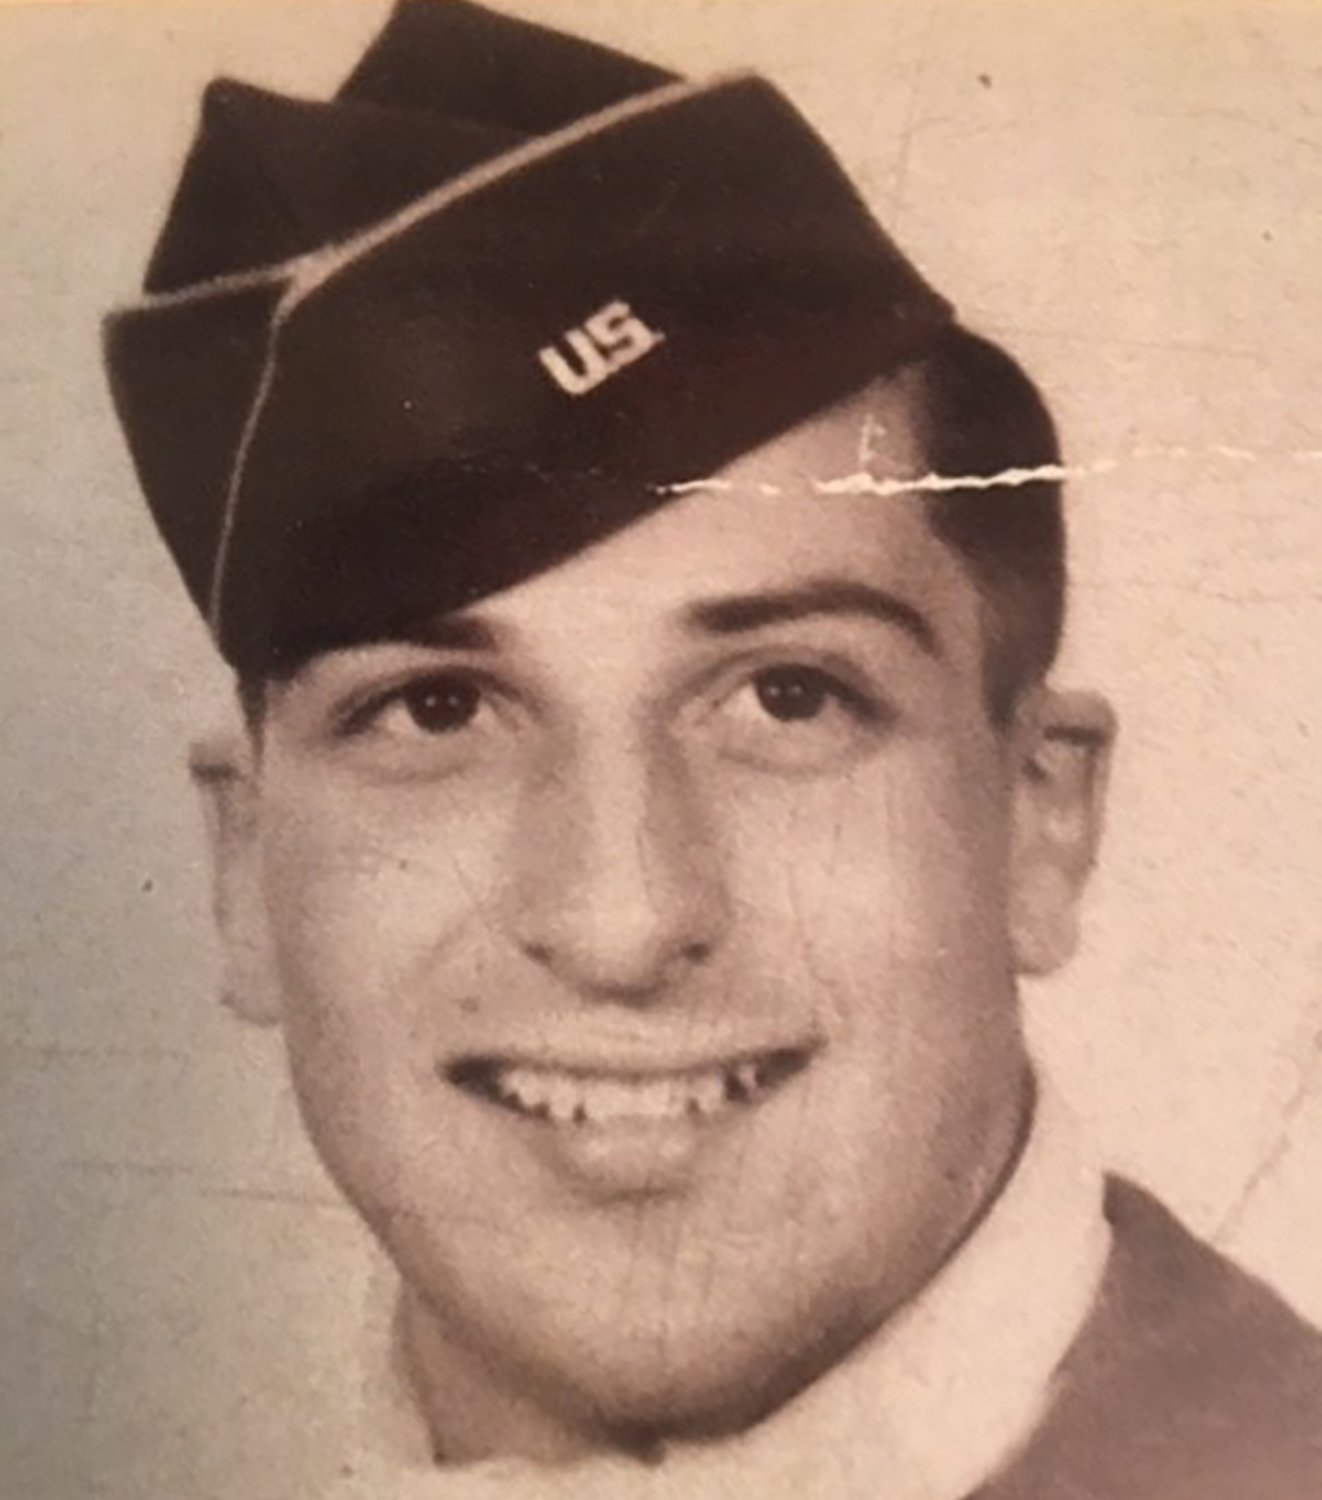 Frank Cohn, now a 95-year-old retired Army colonel, is seen pictured in a photo during World War II. While deployed, Cohn served as an intelligence officer and a German translator. Photo courtesy of Frank Cohn